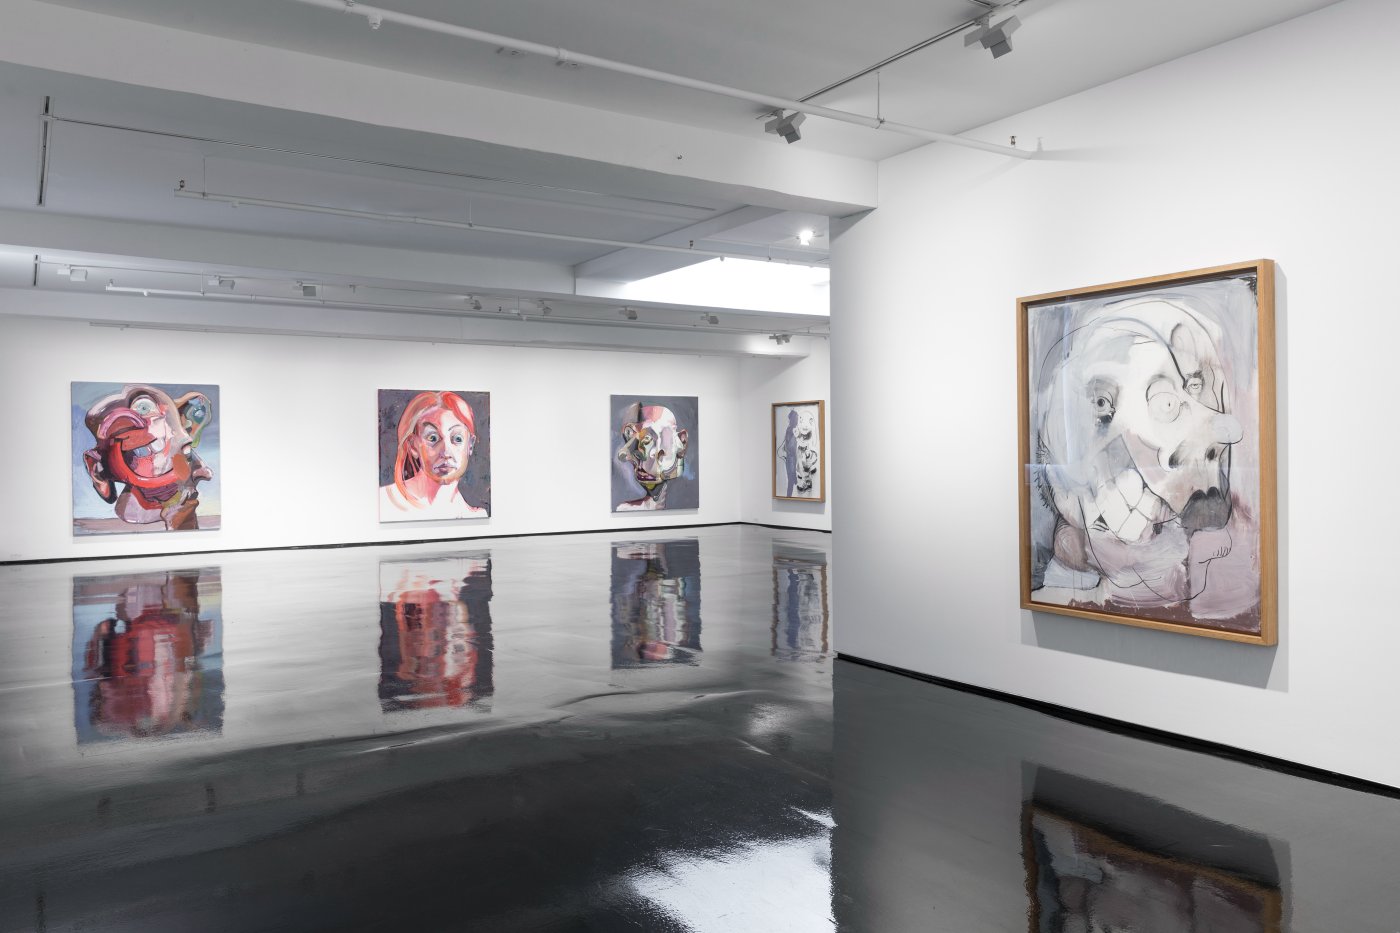 Installation image for Ben Quilty: Shadowed, at Tolarno Galleries